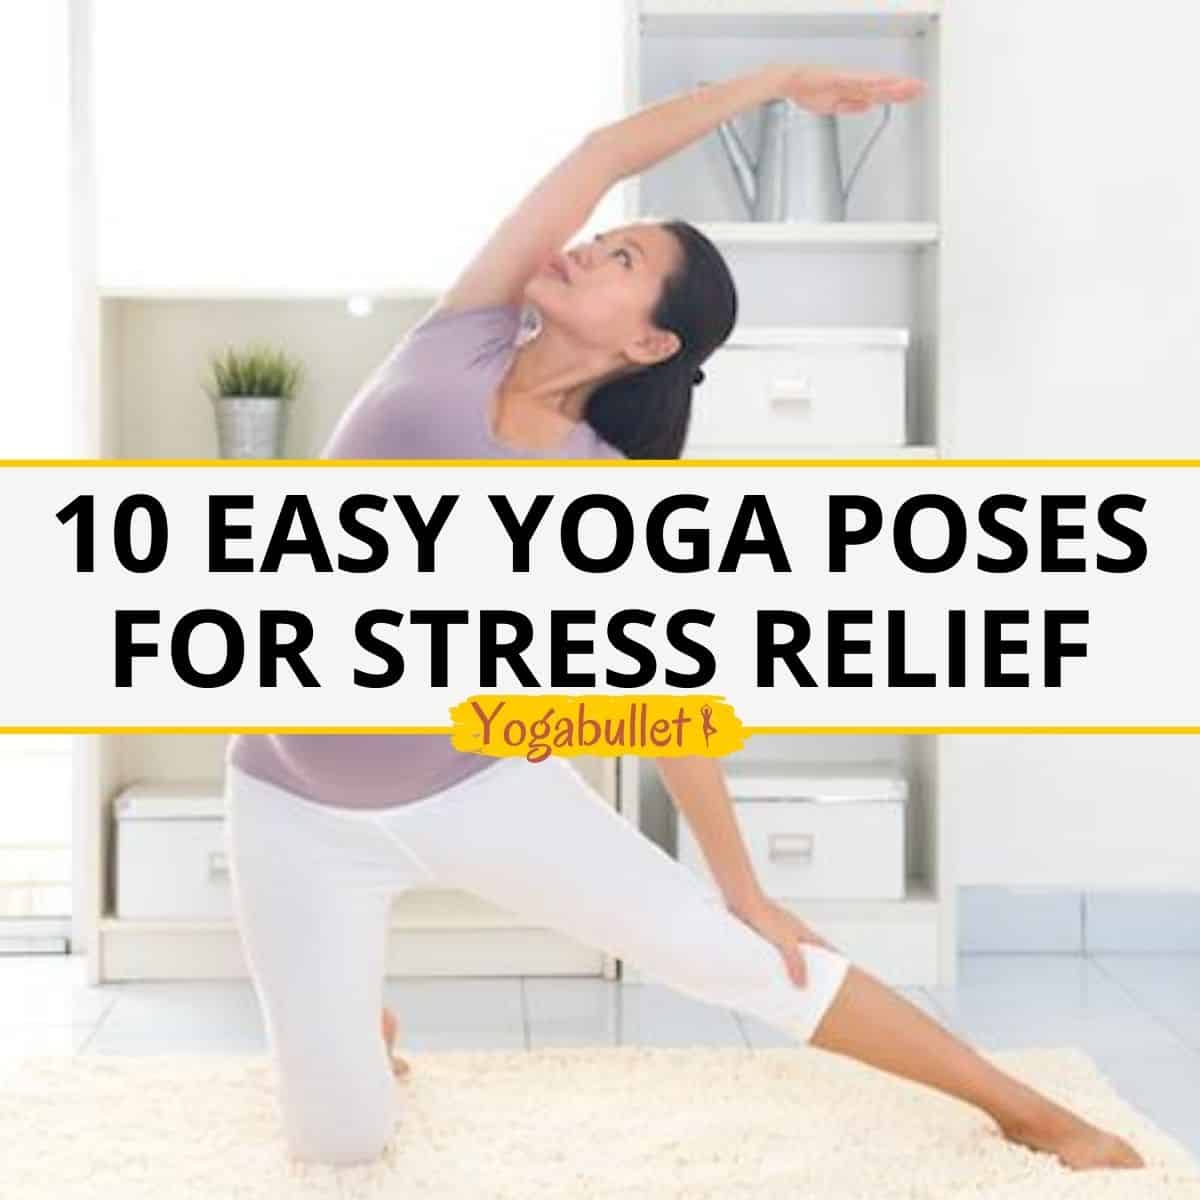 10 easy Yoga poses for stress relief